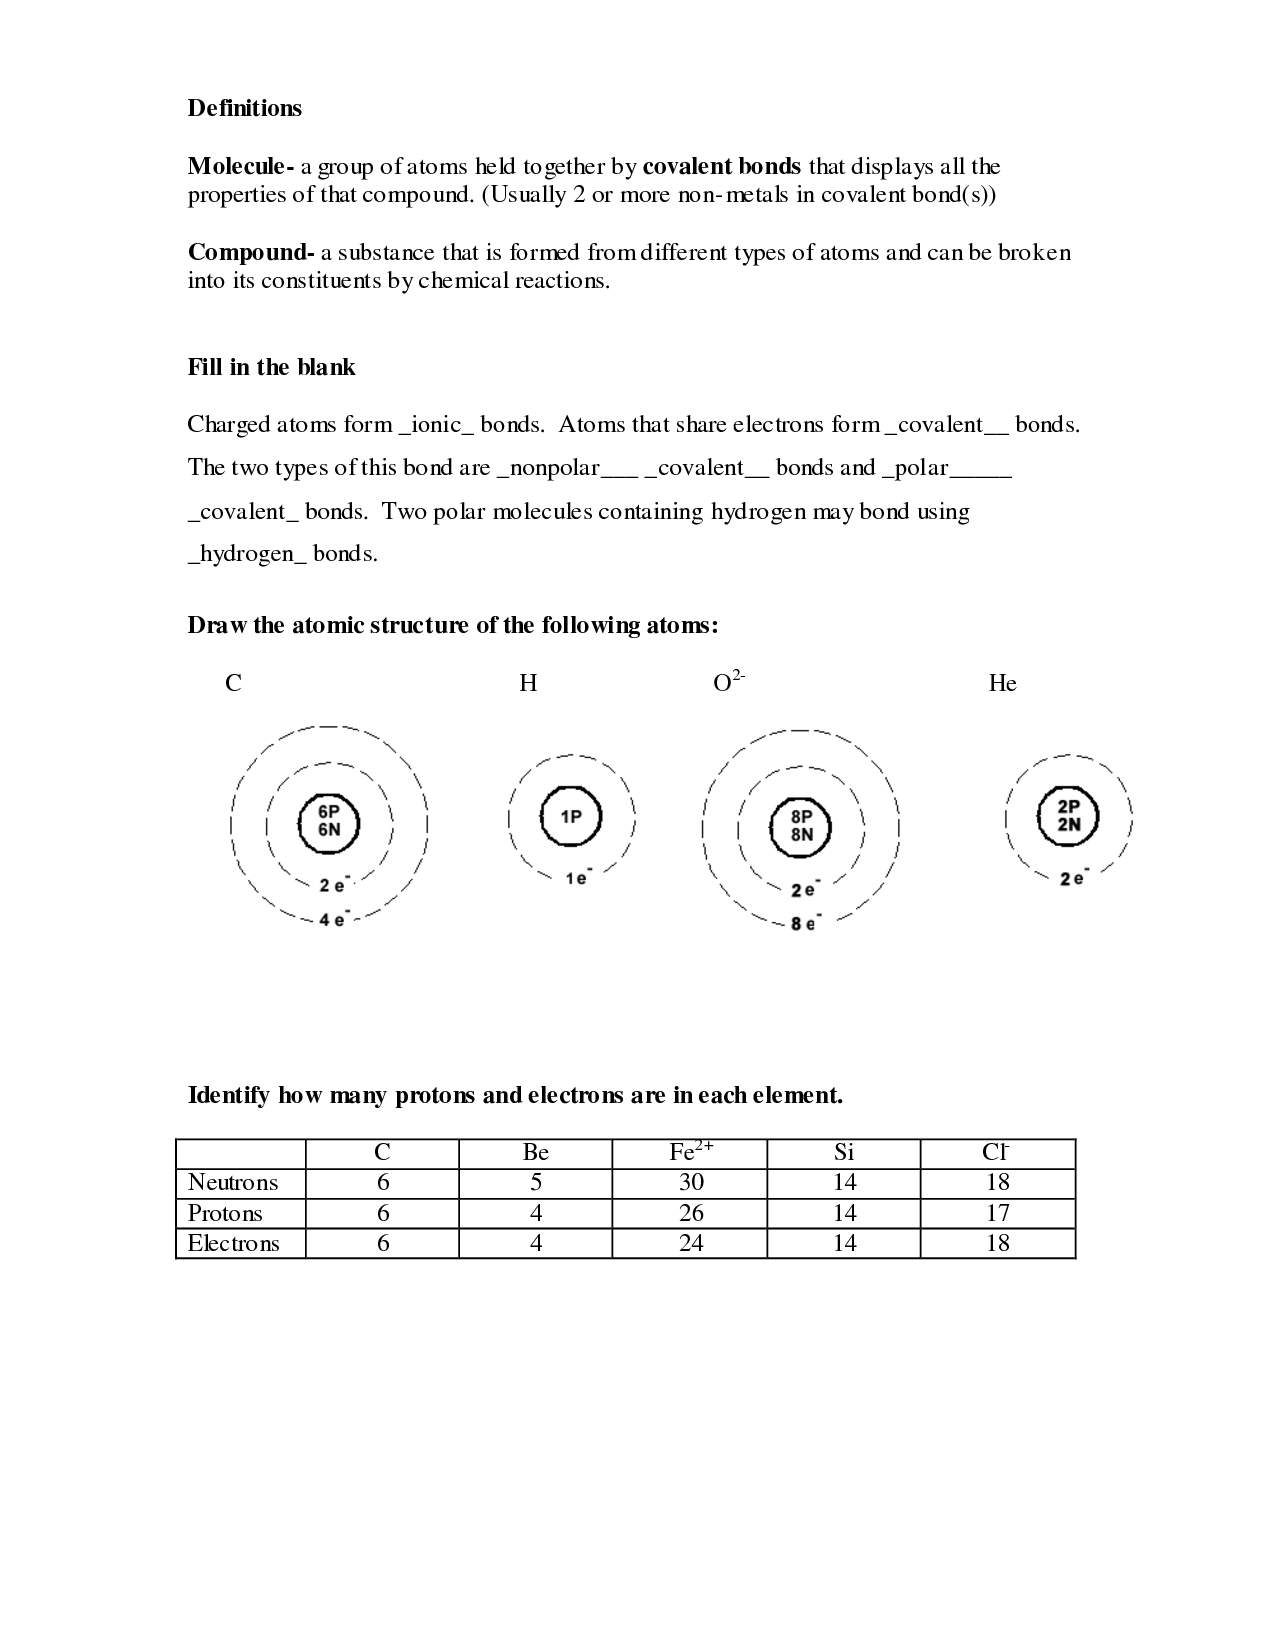 12-best-images-of-atomic-structure-diagram-worksheet-atomic-structure-worksheet-answers